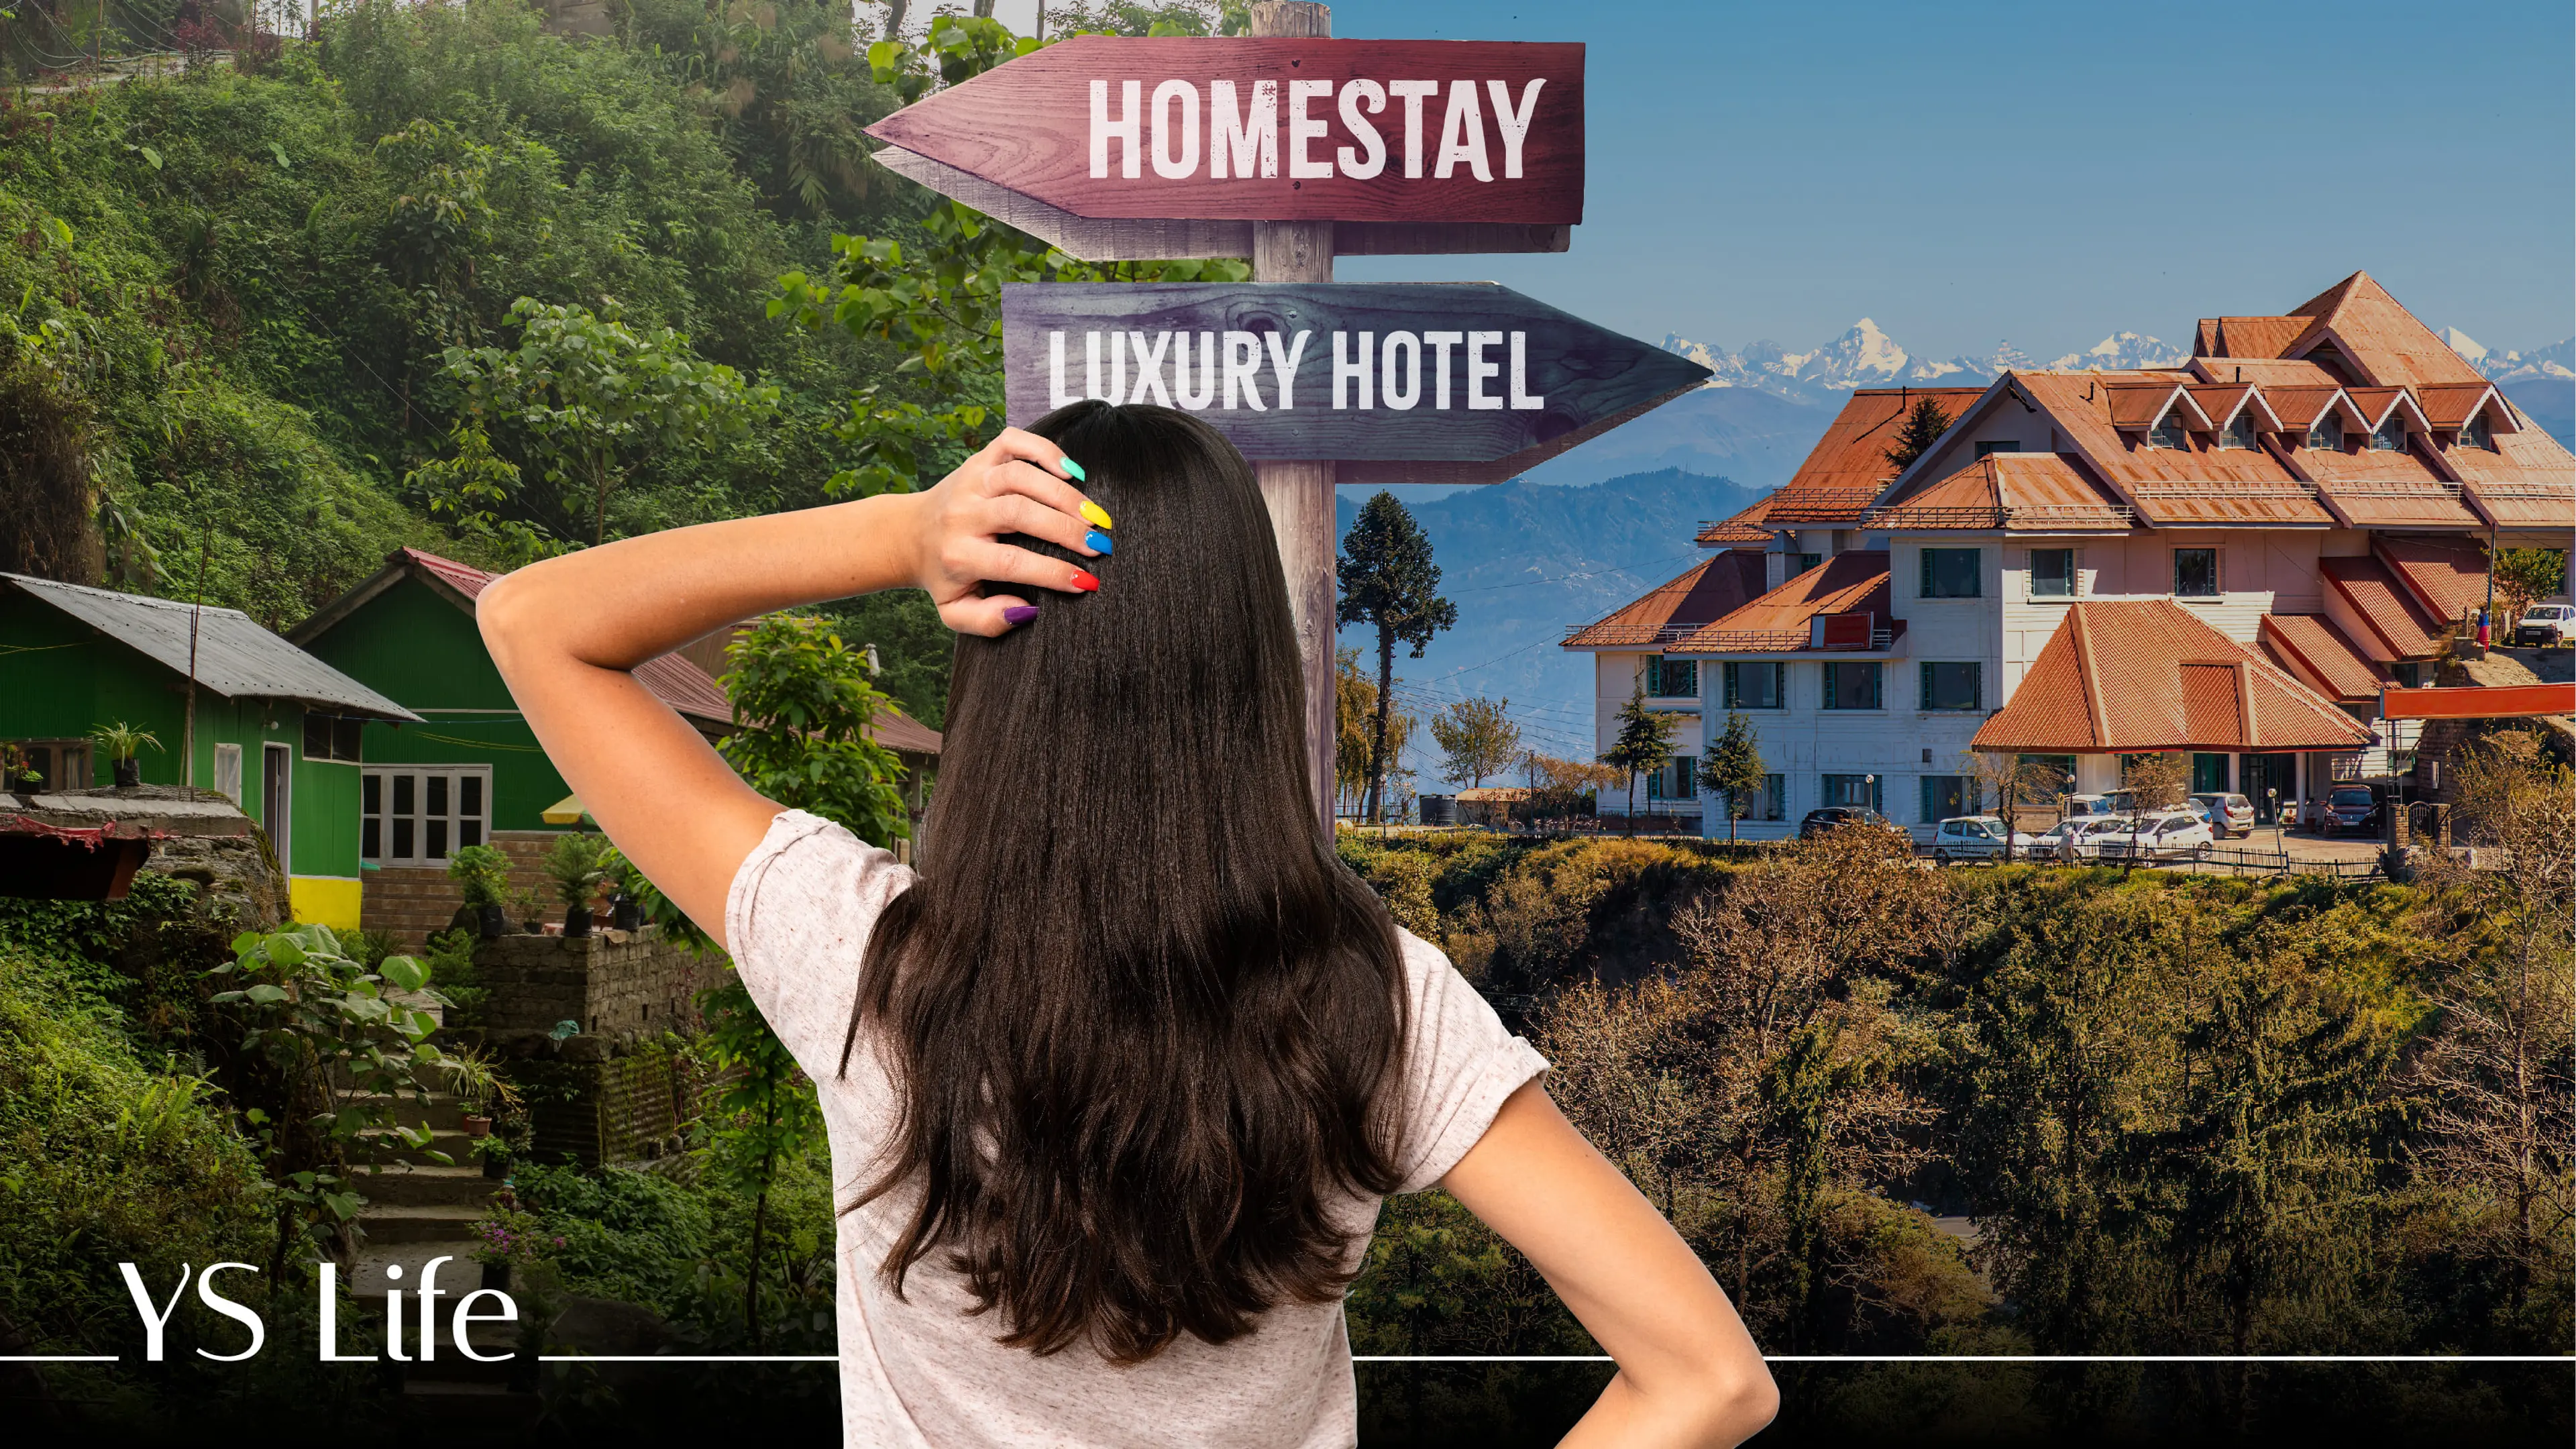 In the battle between homestays and hotels, personalisation wins